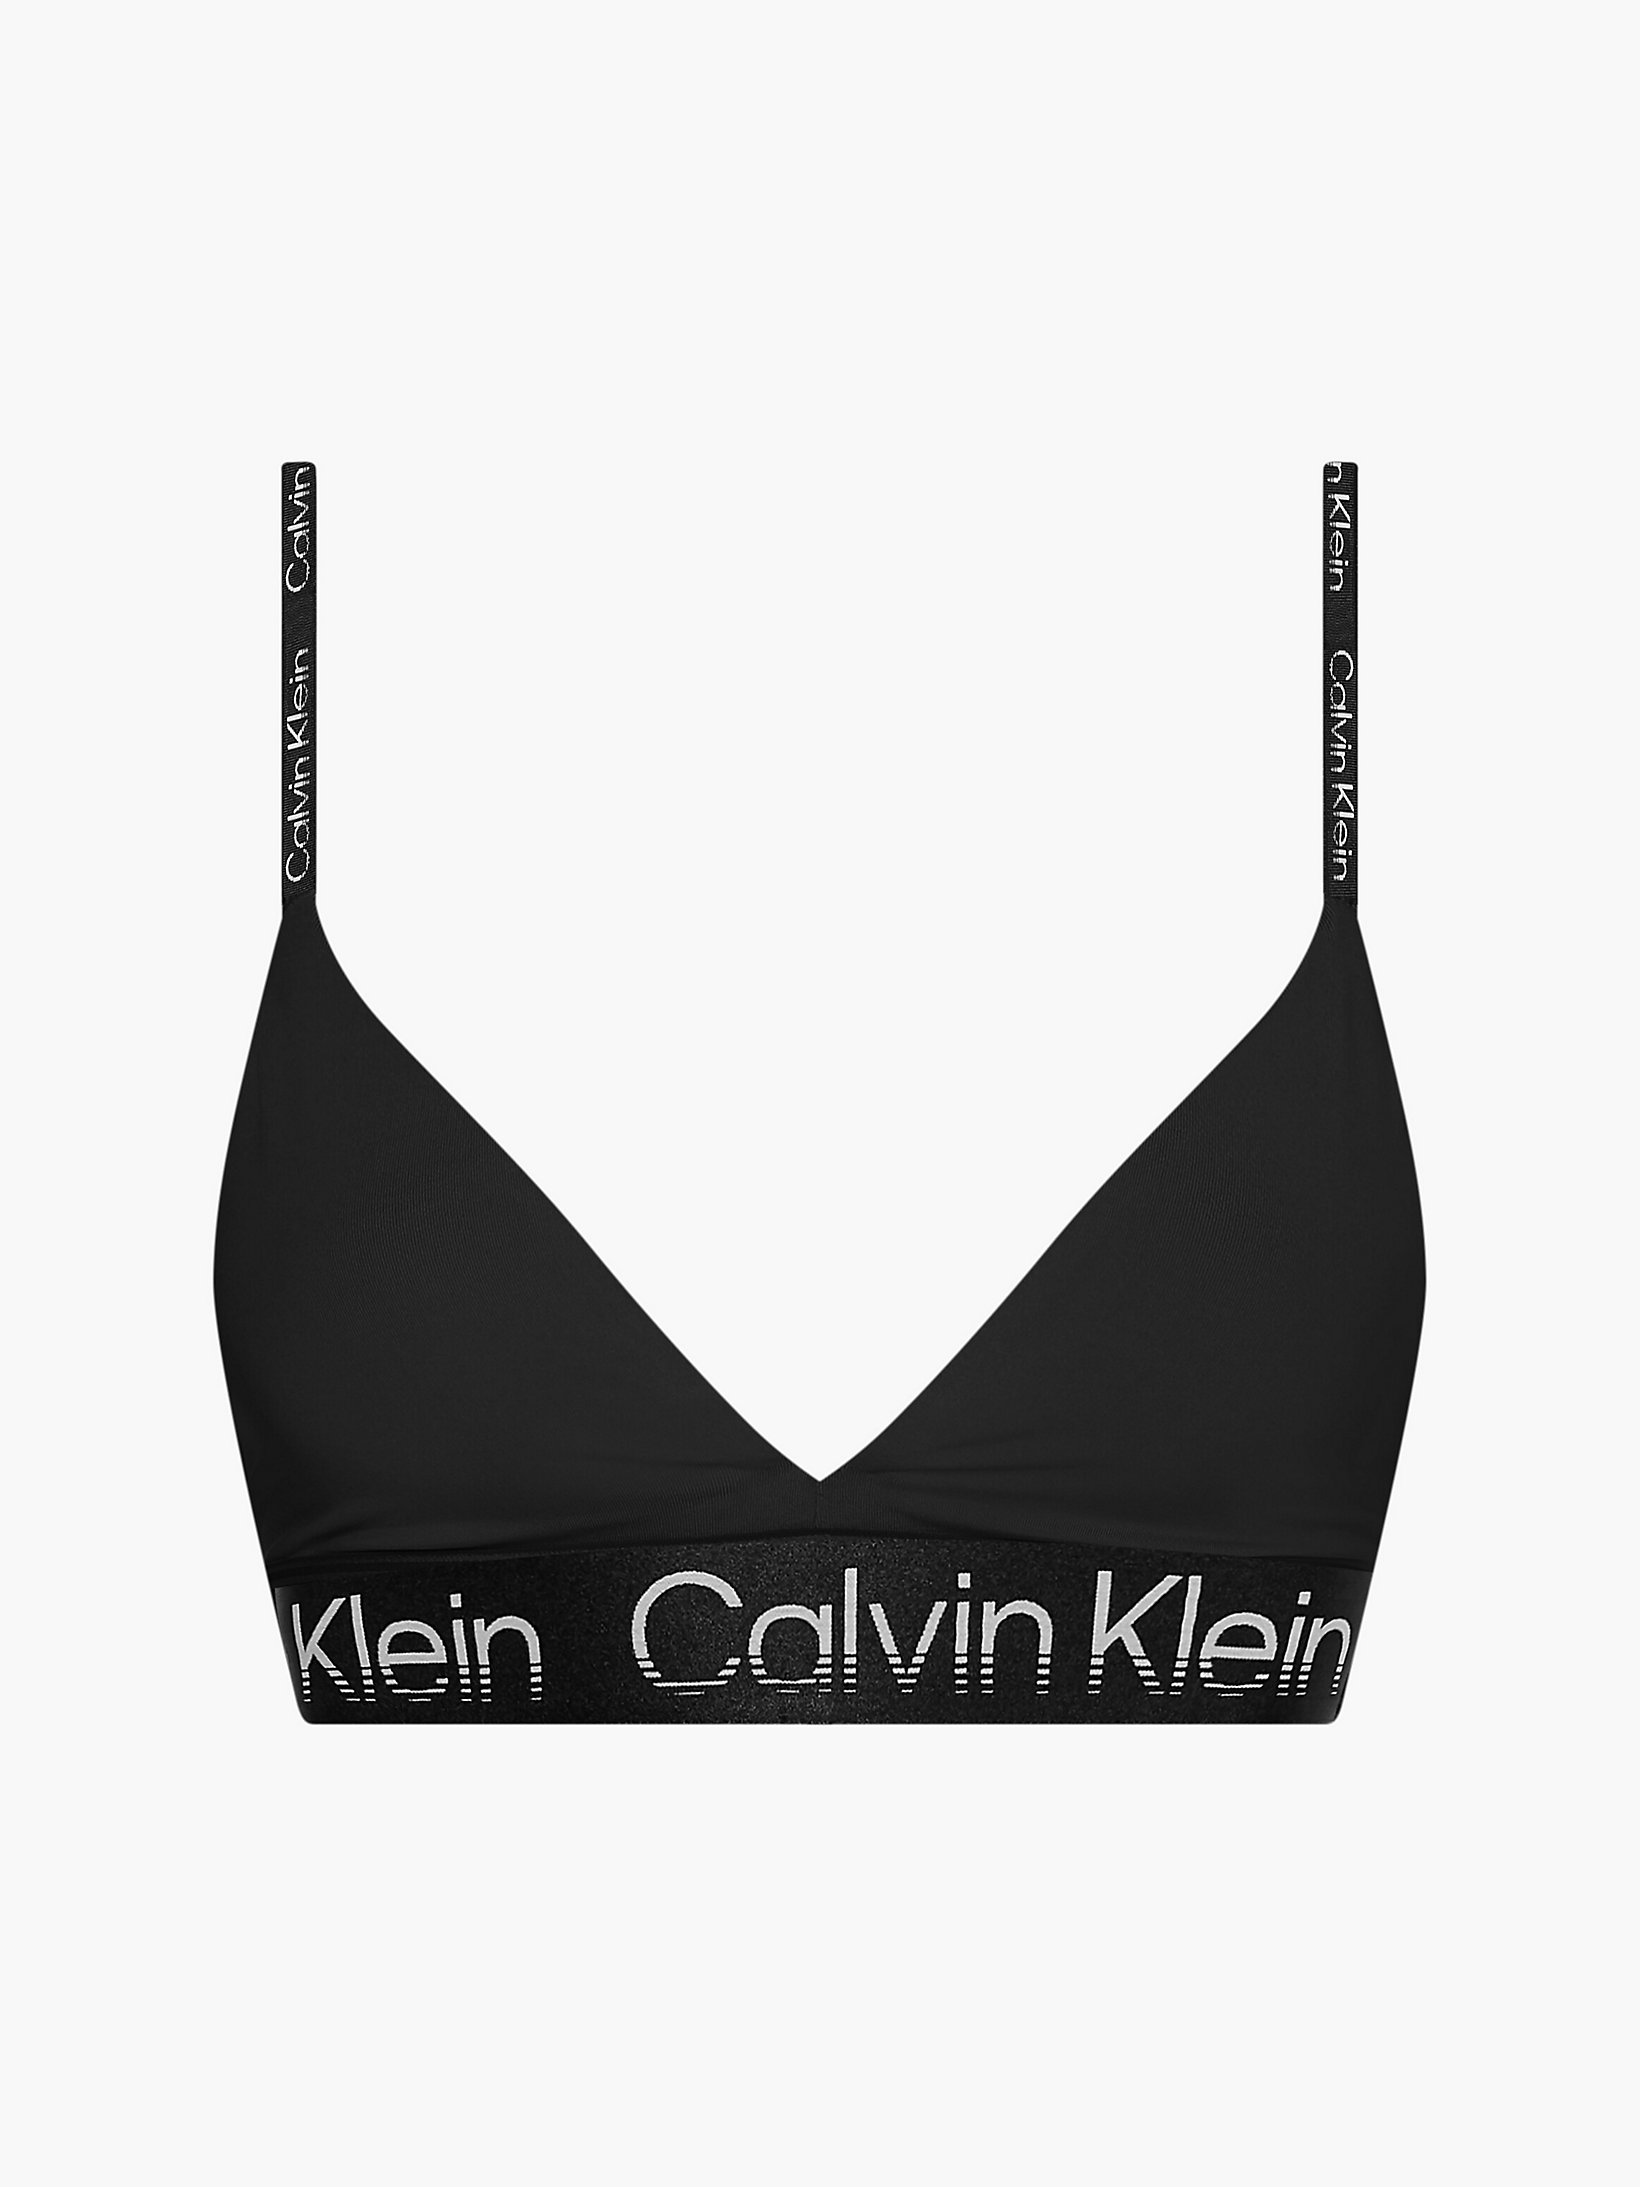 CK Black Recycled Polyester Low Impact Sports Bra undefined women Calvin Klein